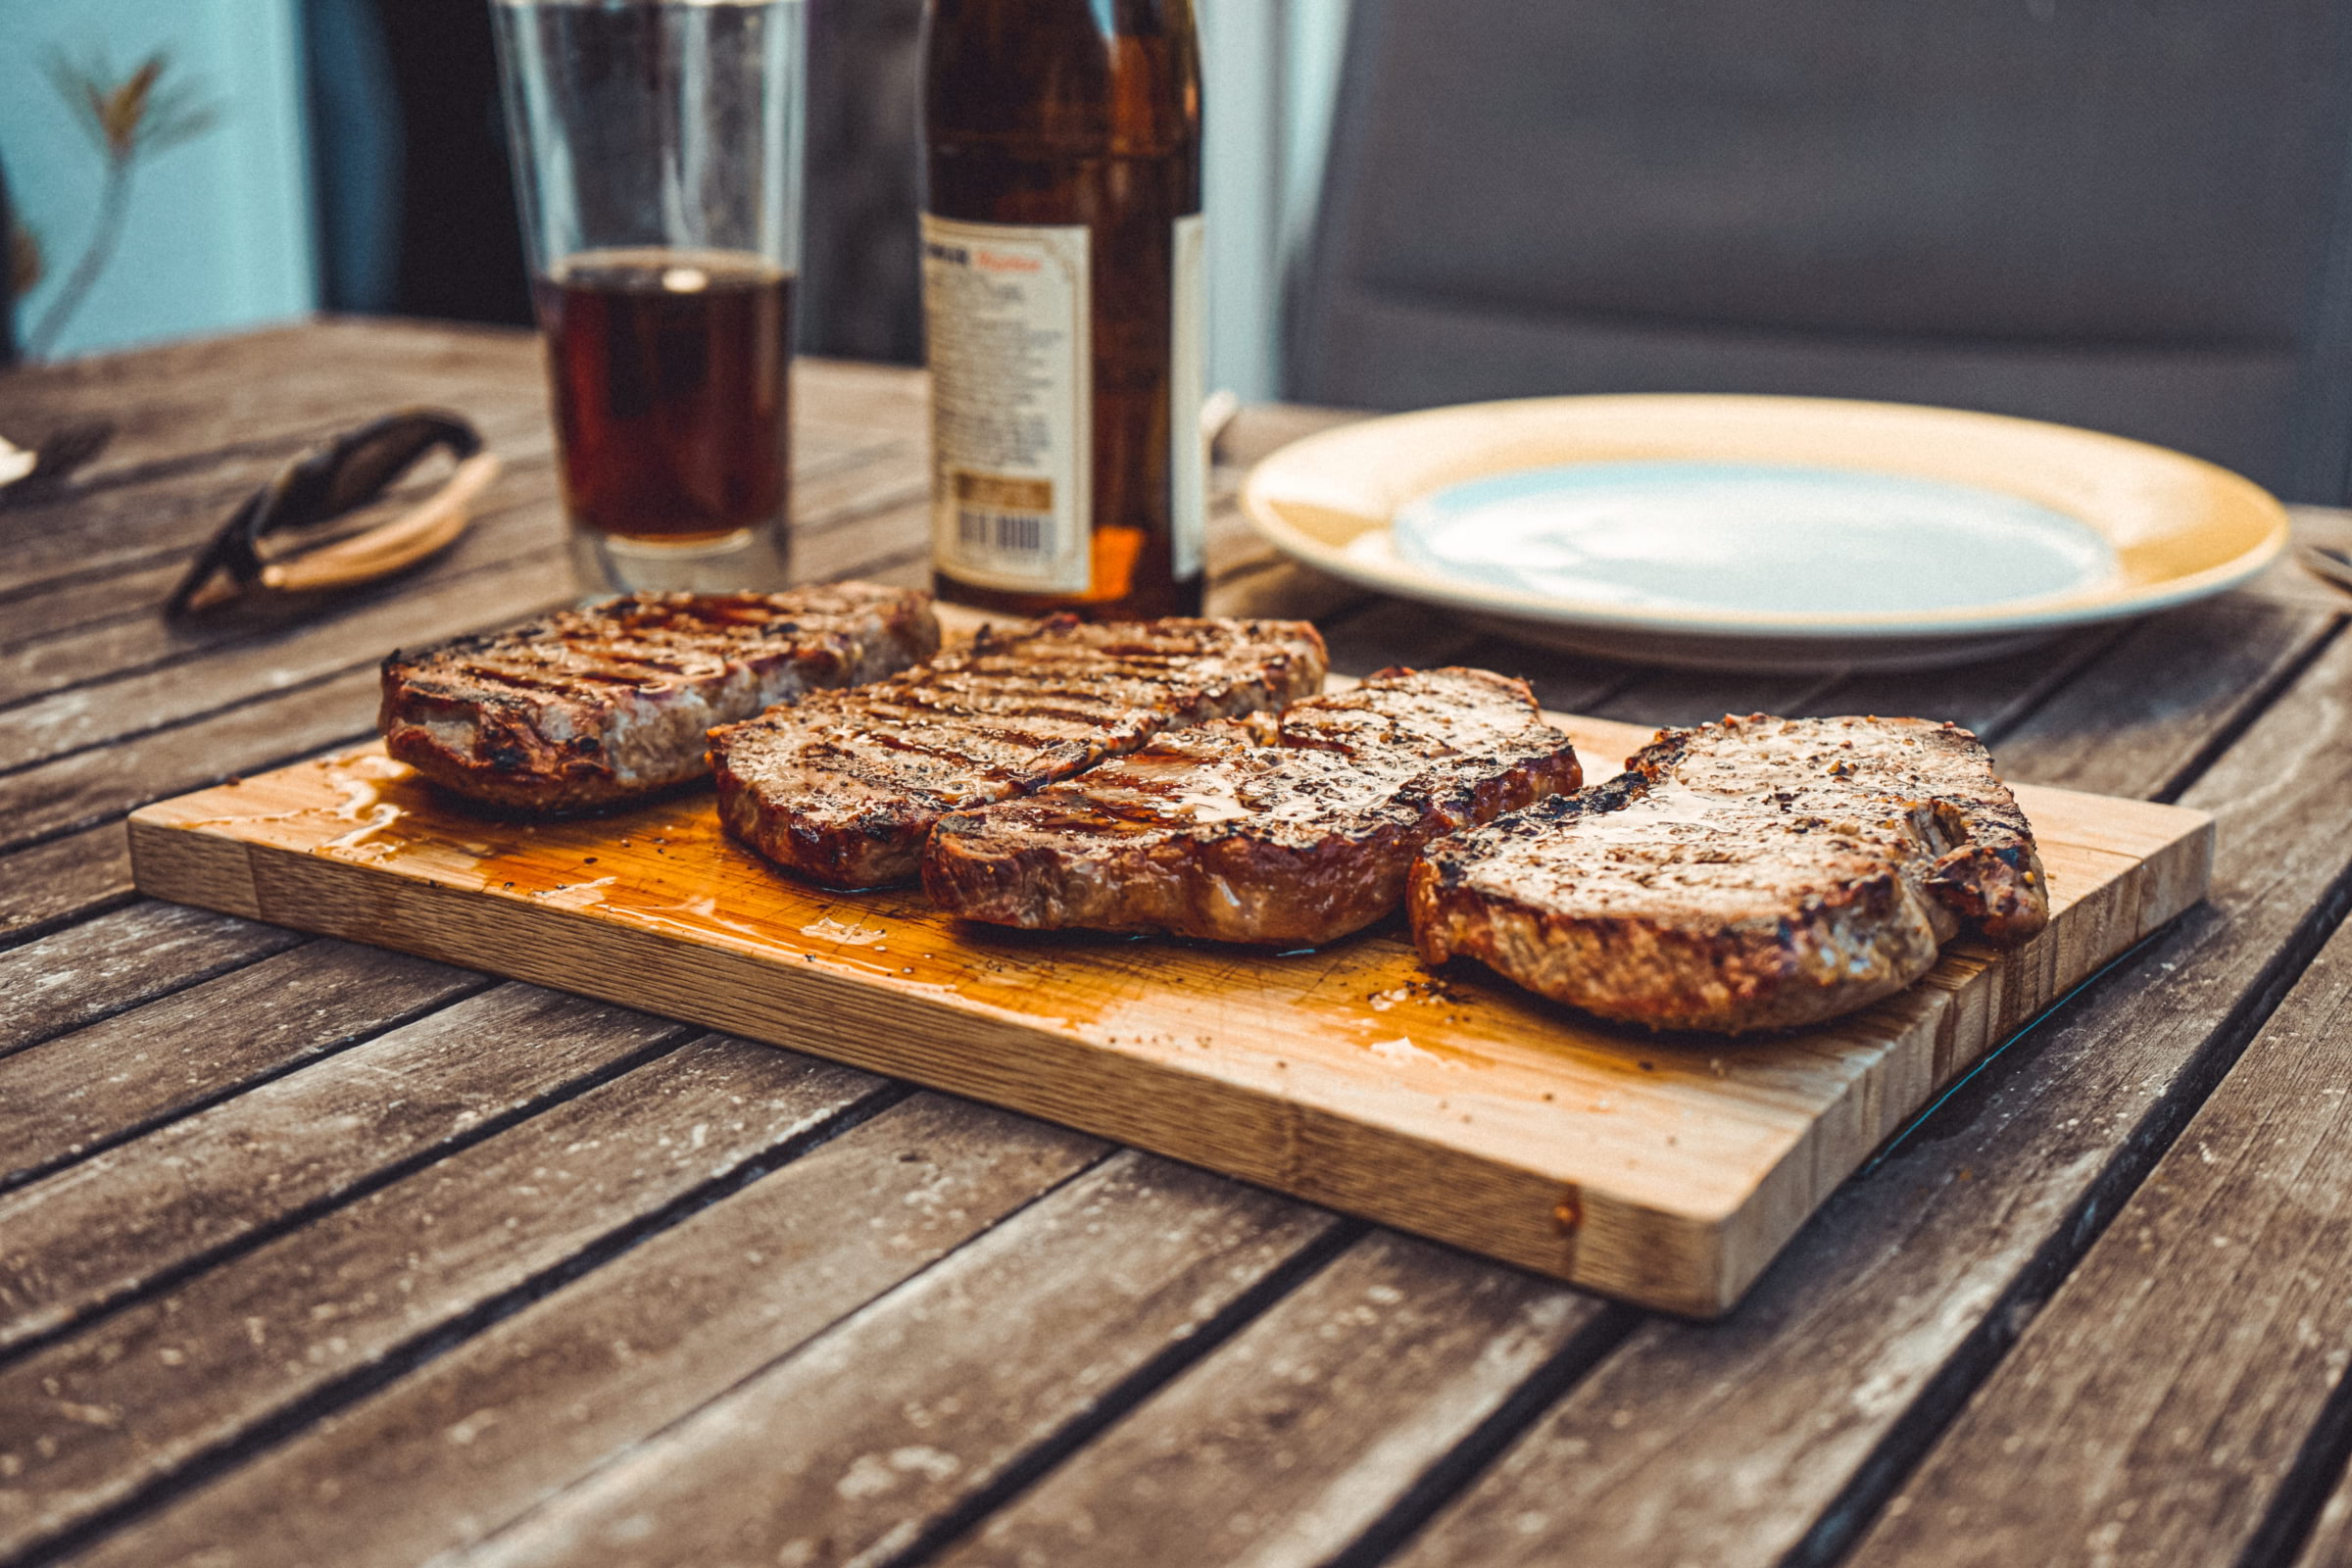 Wine who? You can get beer and steak pairing at this Camden restaurant